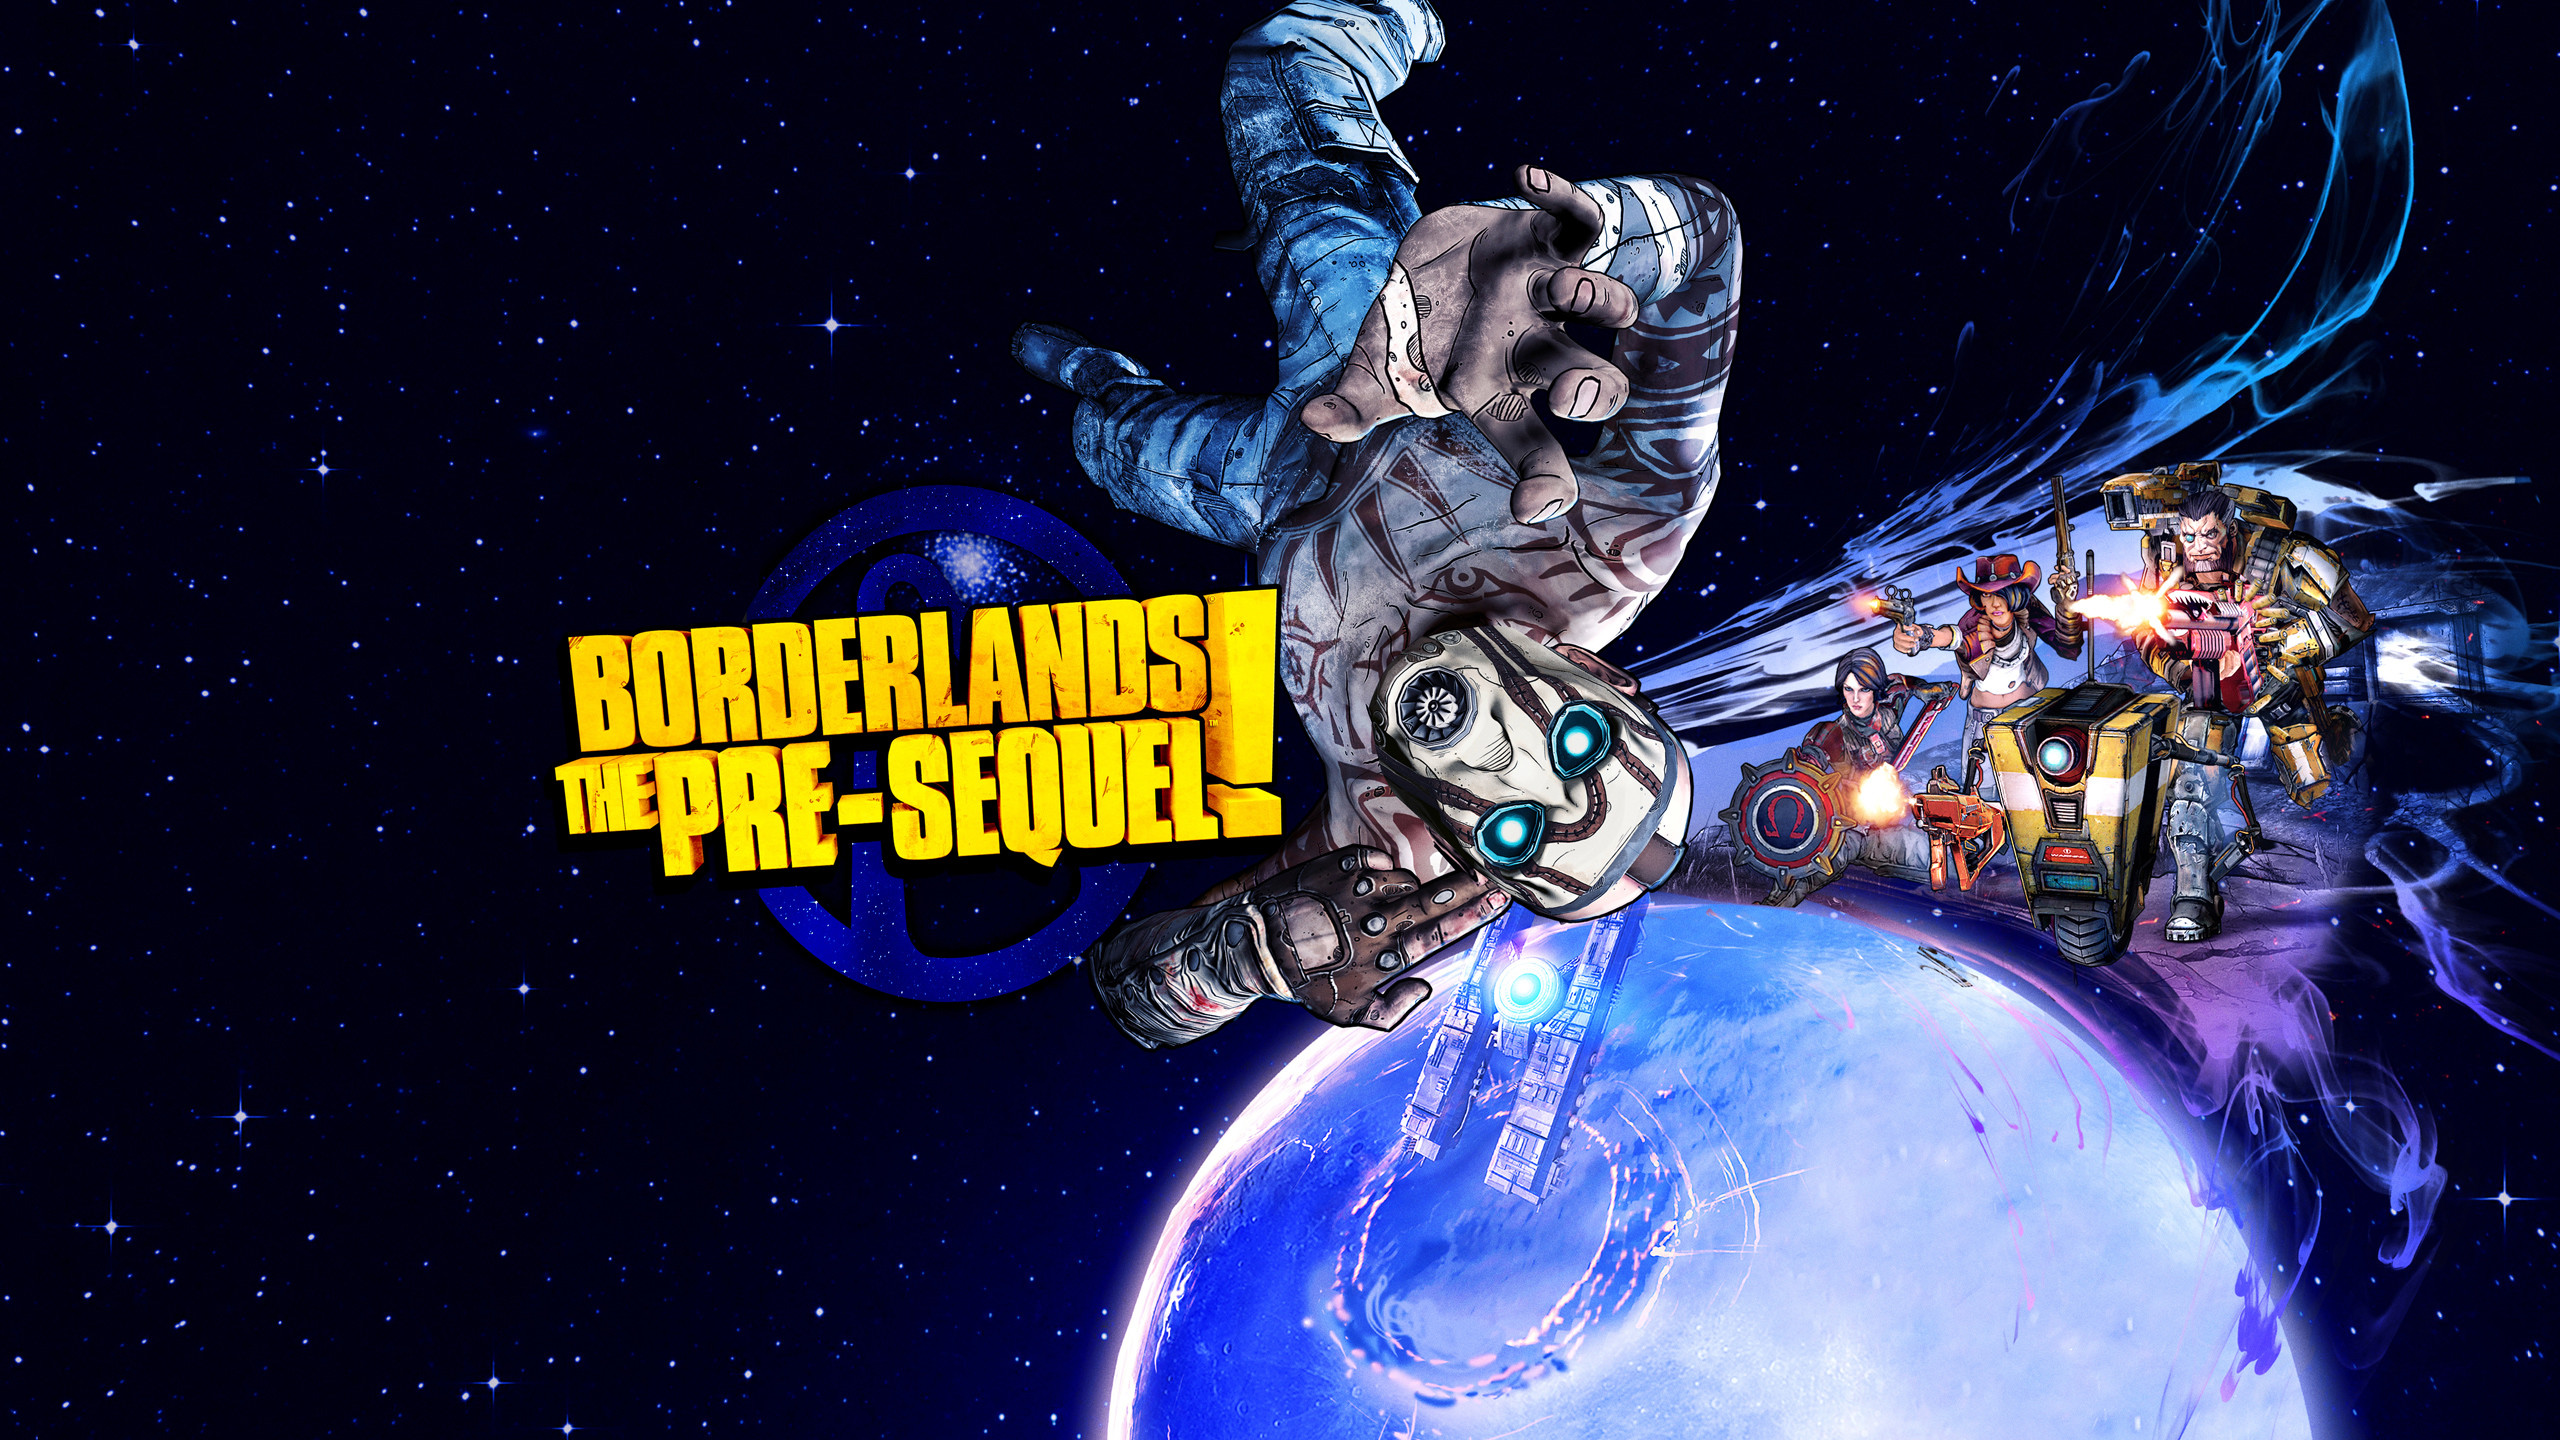 2560x1440 31 Borderlands: The Pre-Sequel HD Wallpapers | Backgrounds - Wallpaper Abyss